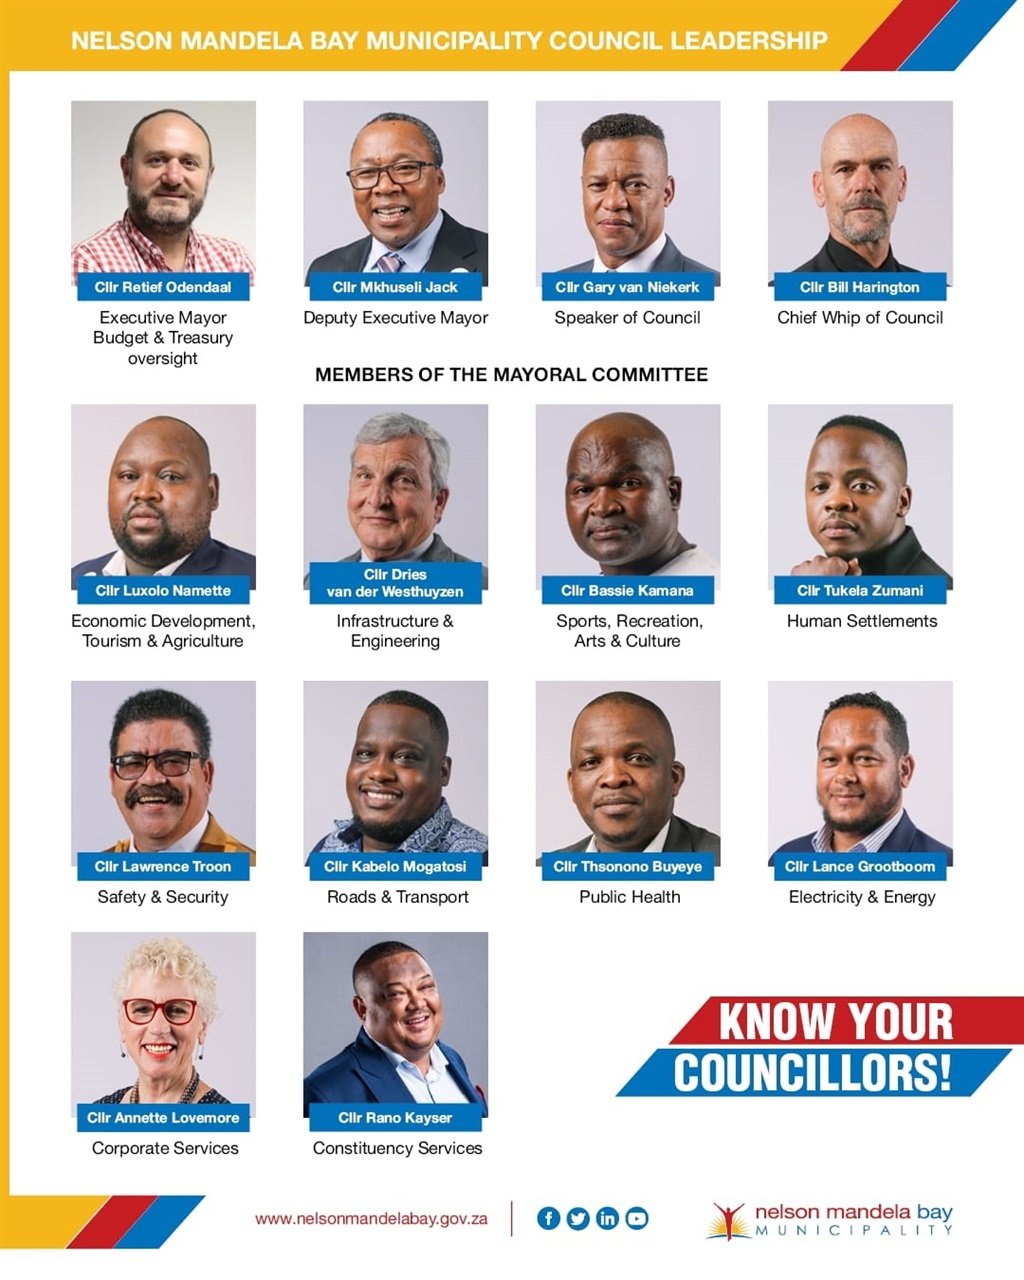 Nelson Mandela Bay executive mayor, Retief Odendaal, has finalised the appointment of the Nelson Mandela Bay Mayoral Committee.